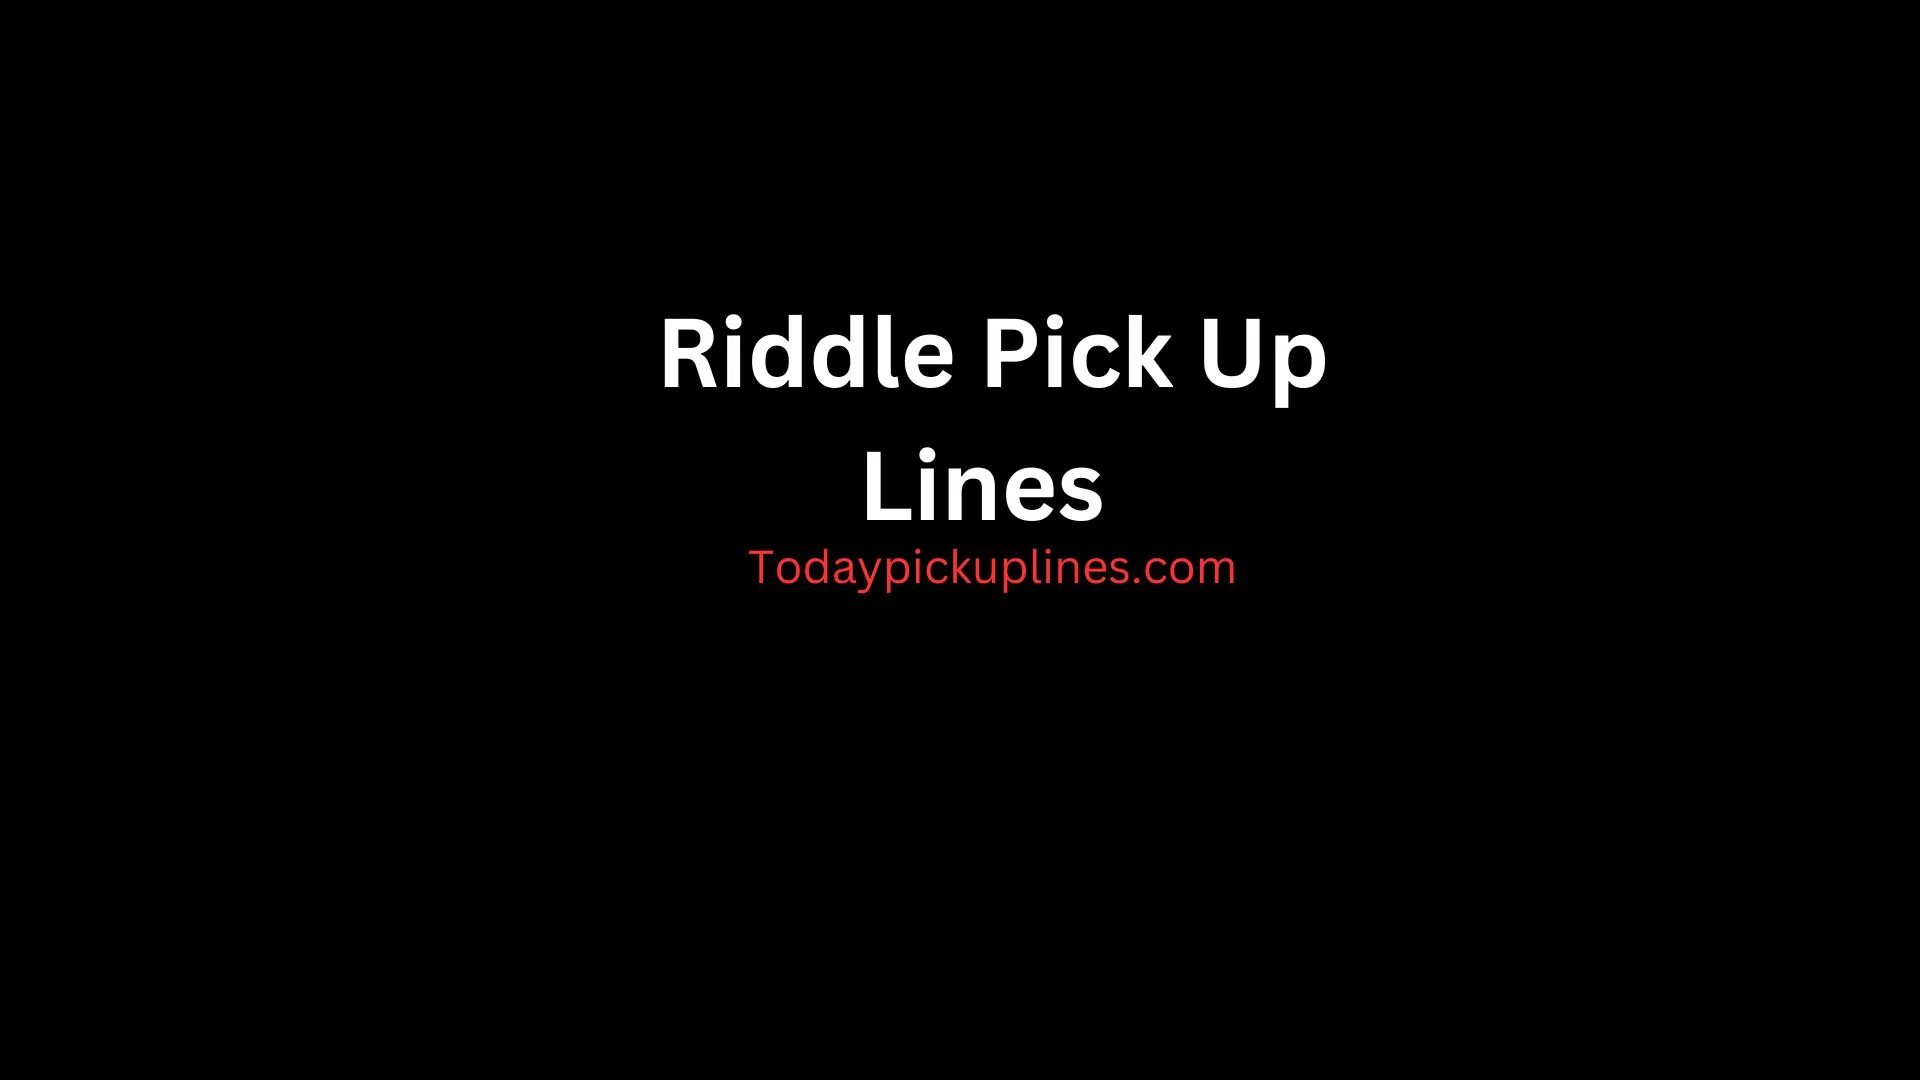 Riddle Pick Up Lines